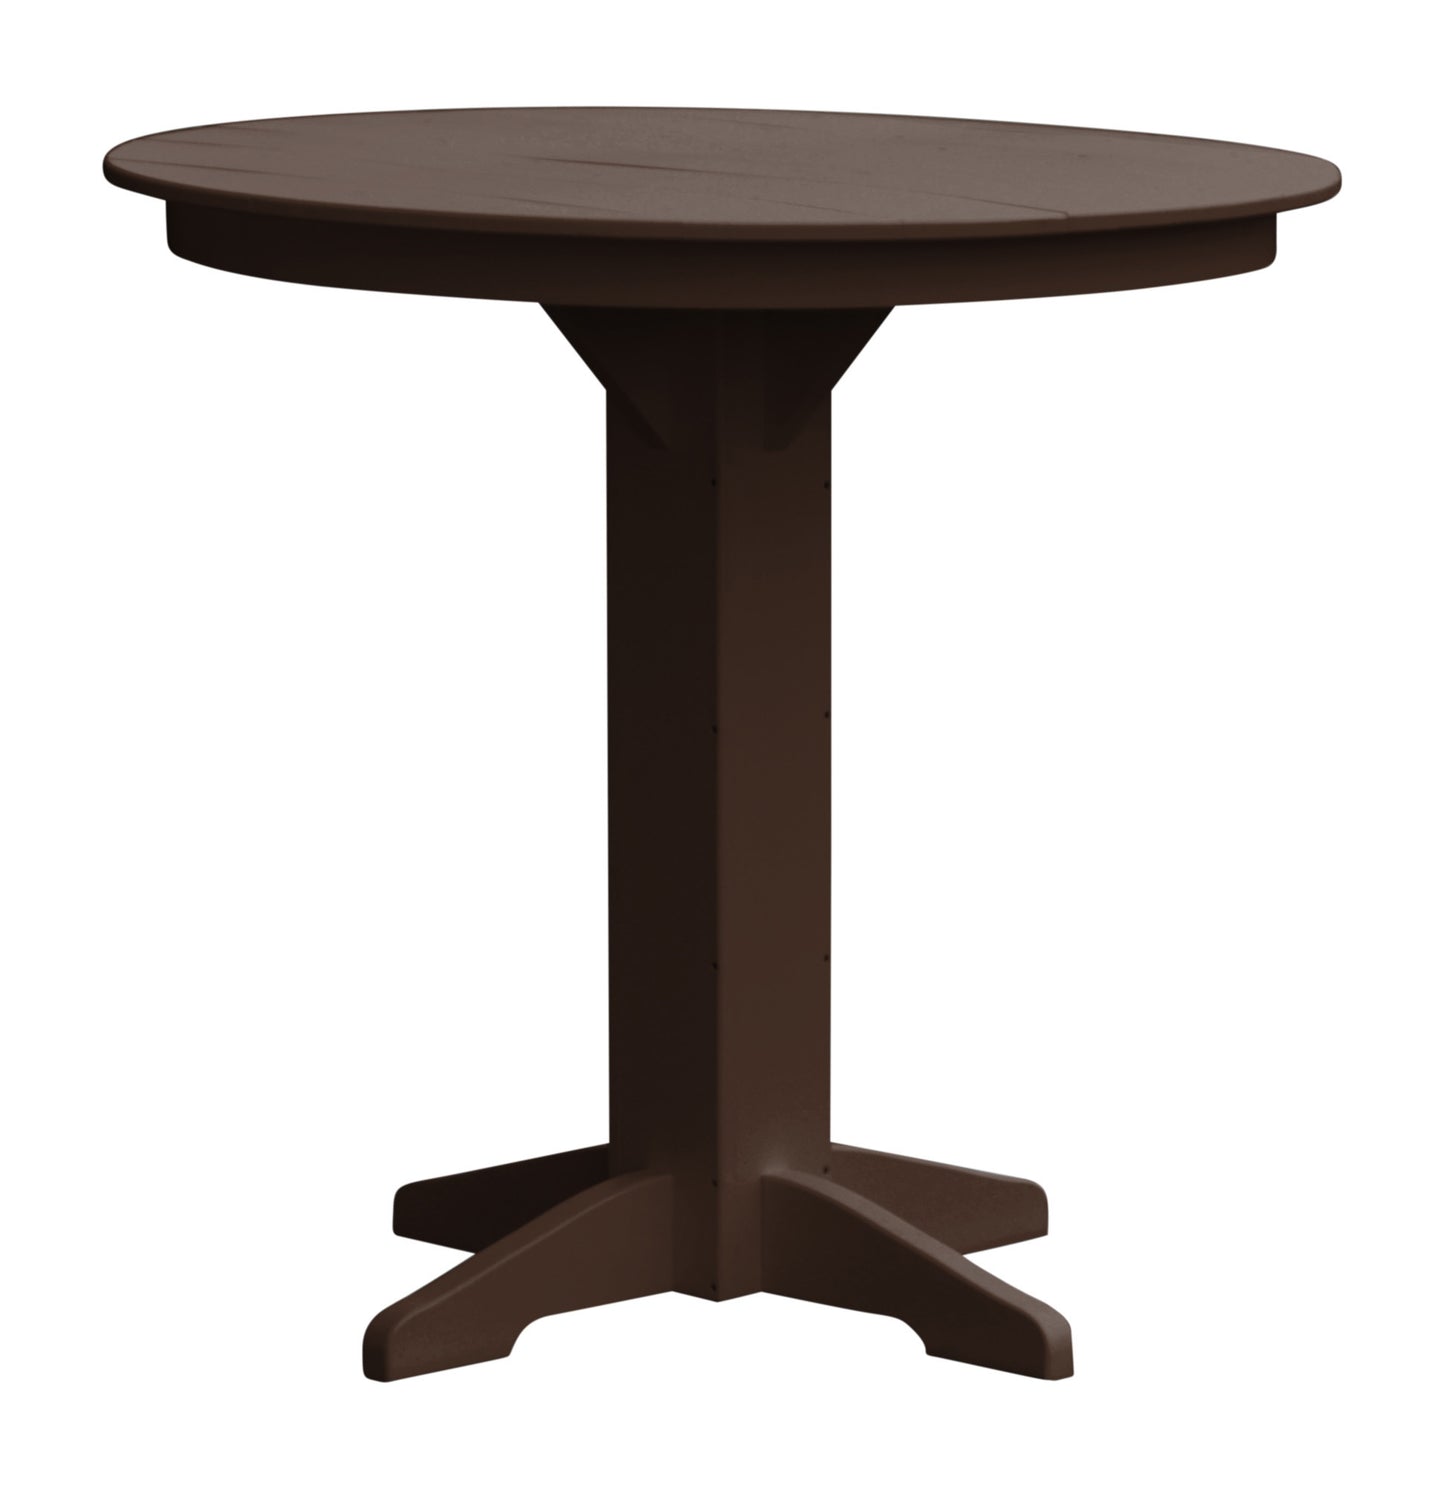 A&L Furniture Recycled Plastic 44" Round Bar Table - Tudor Brown